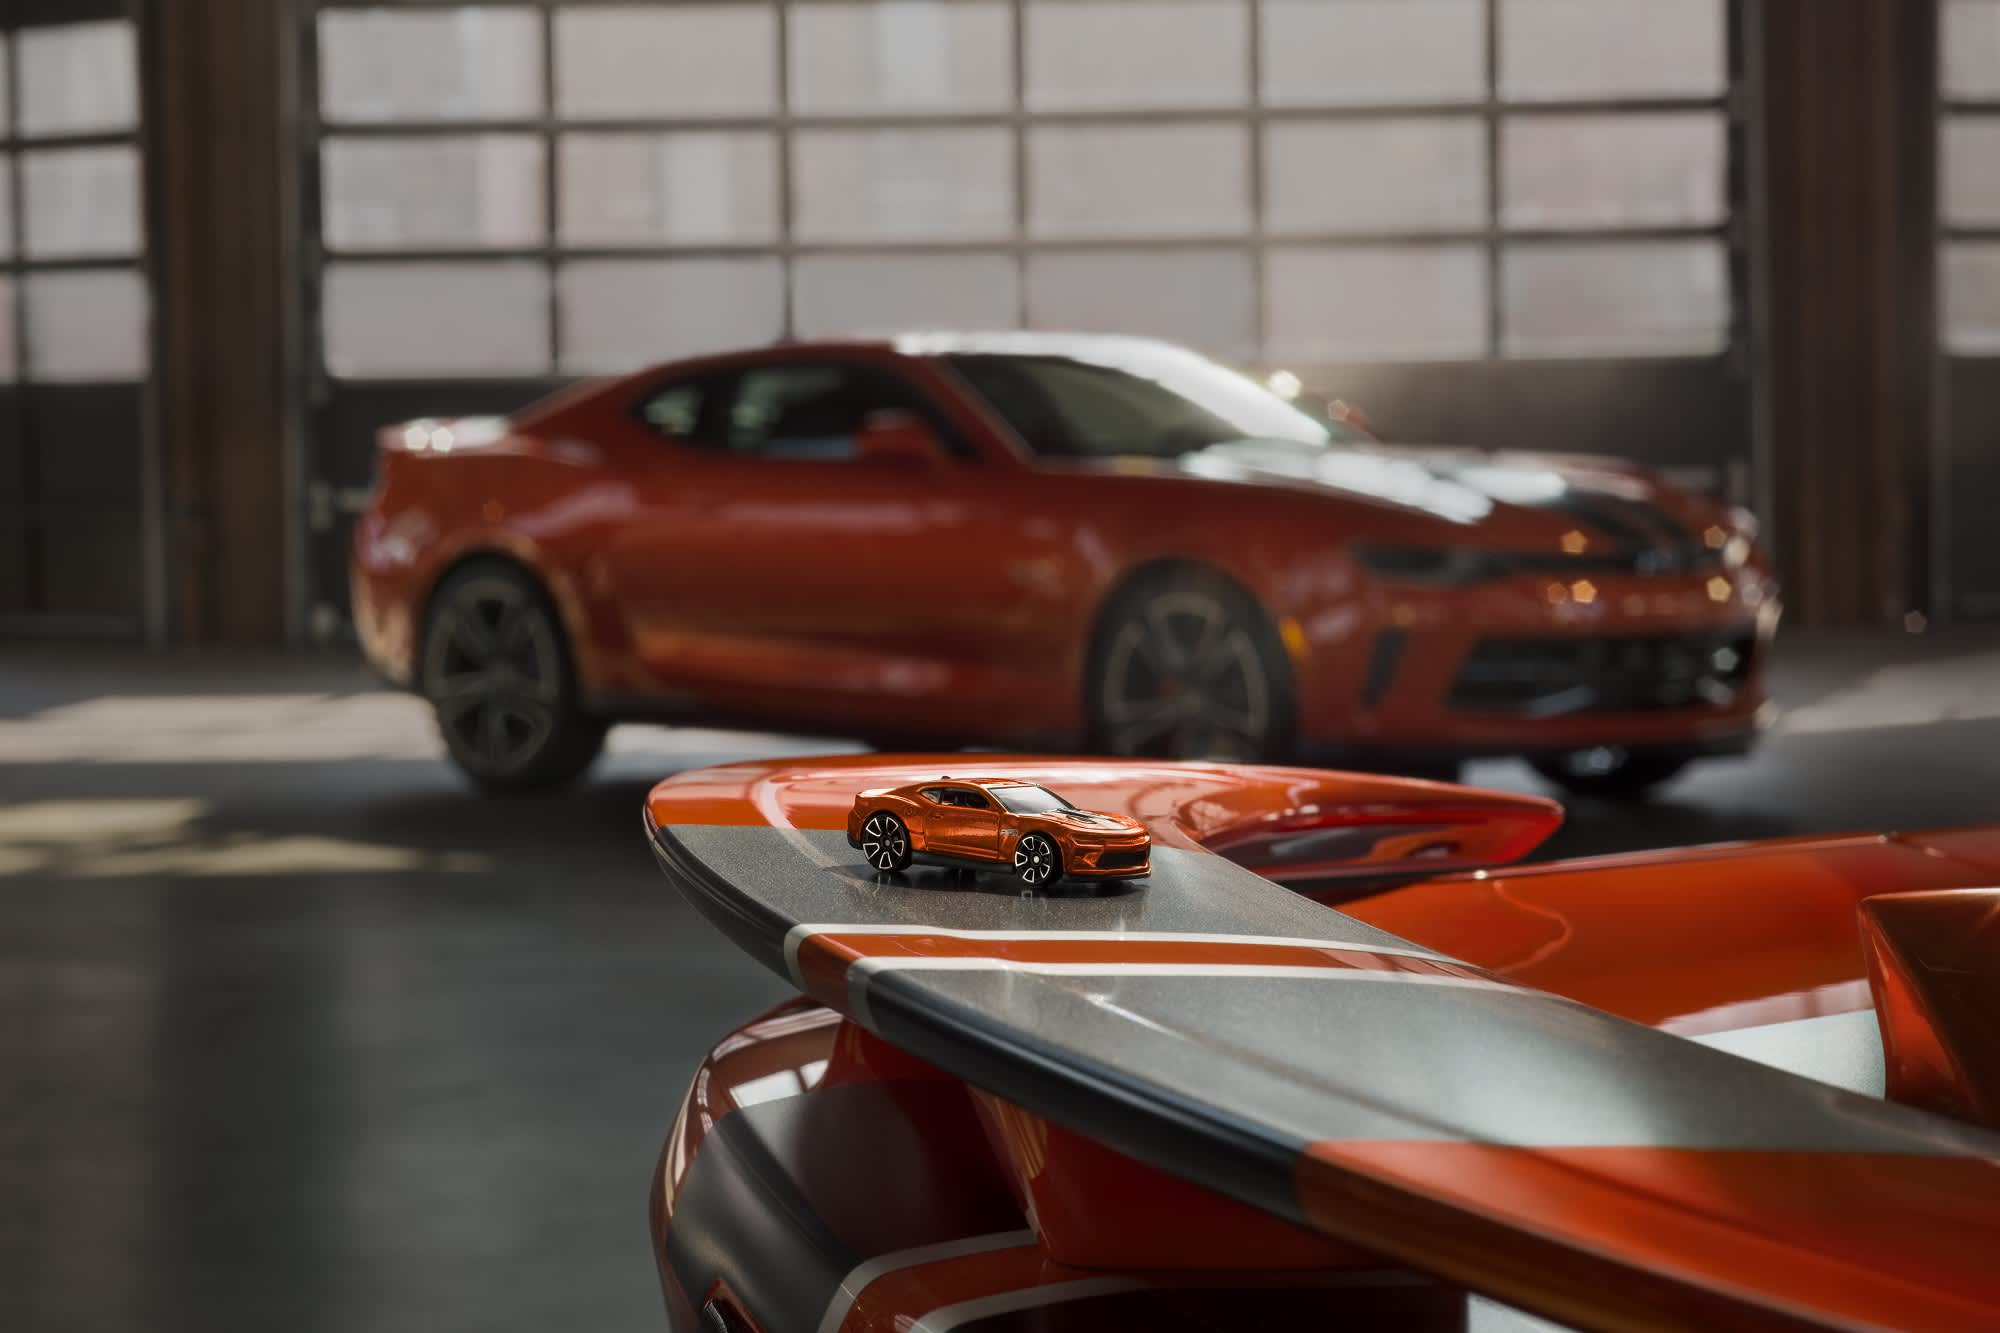 Chevy made life-size Hot Wheels cars that cost $56,000